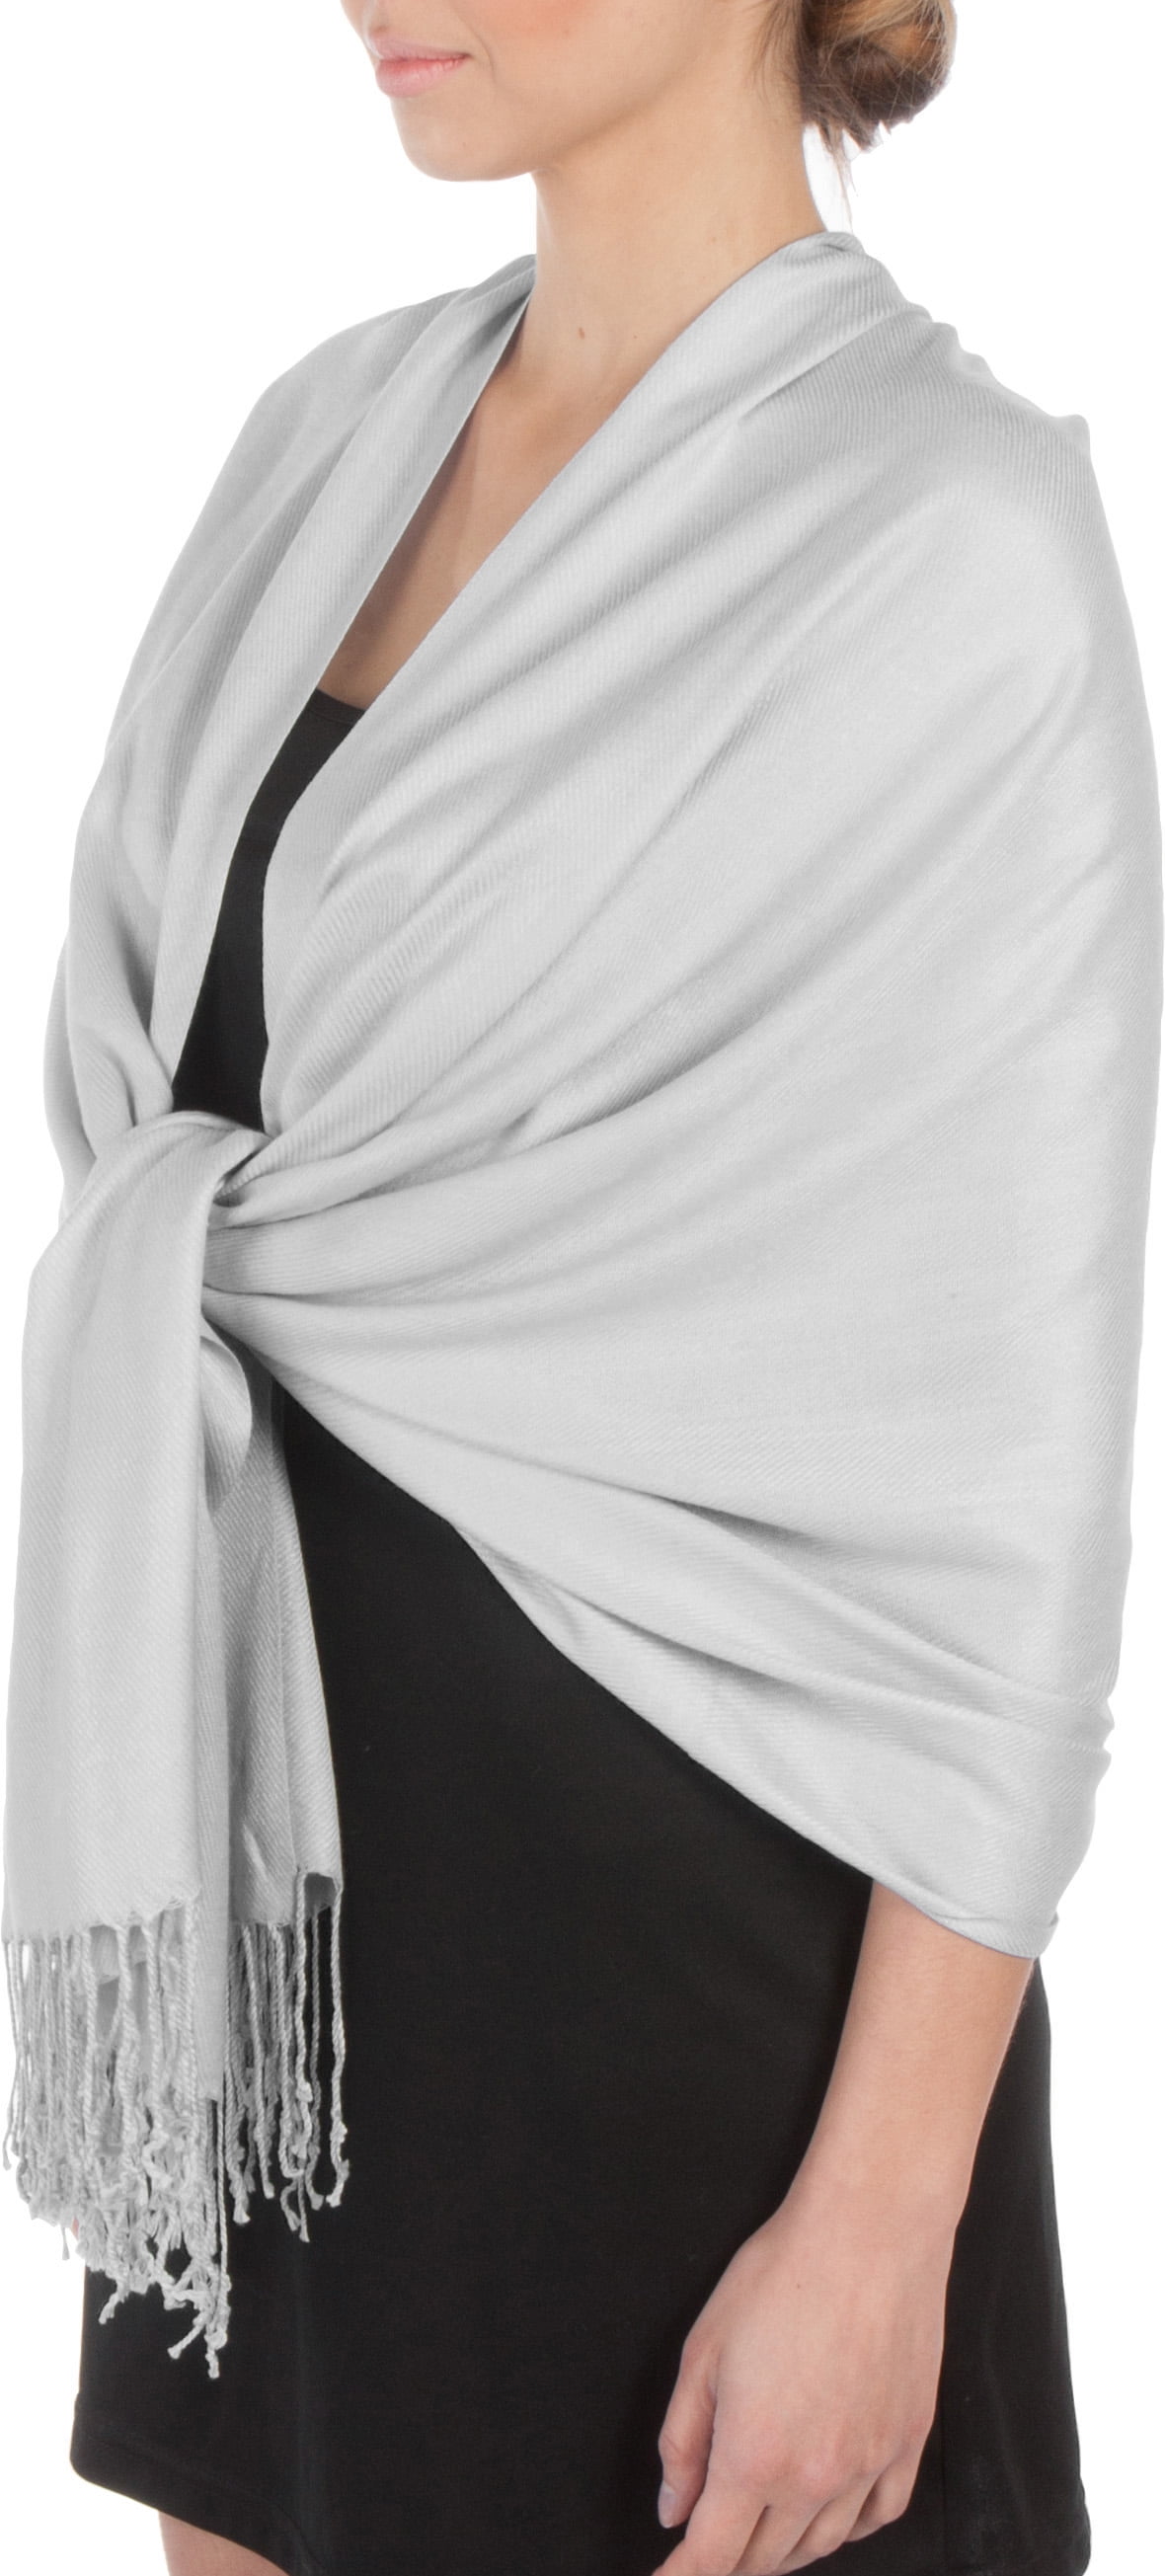 CLEARANCE ~ Gray Large Solid Pashmina Style Wrap and Scarf 24" X 70" SOFT COZY